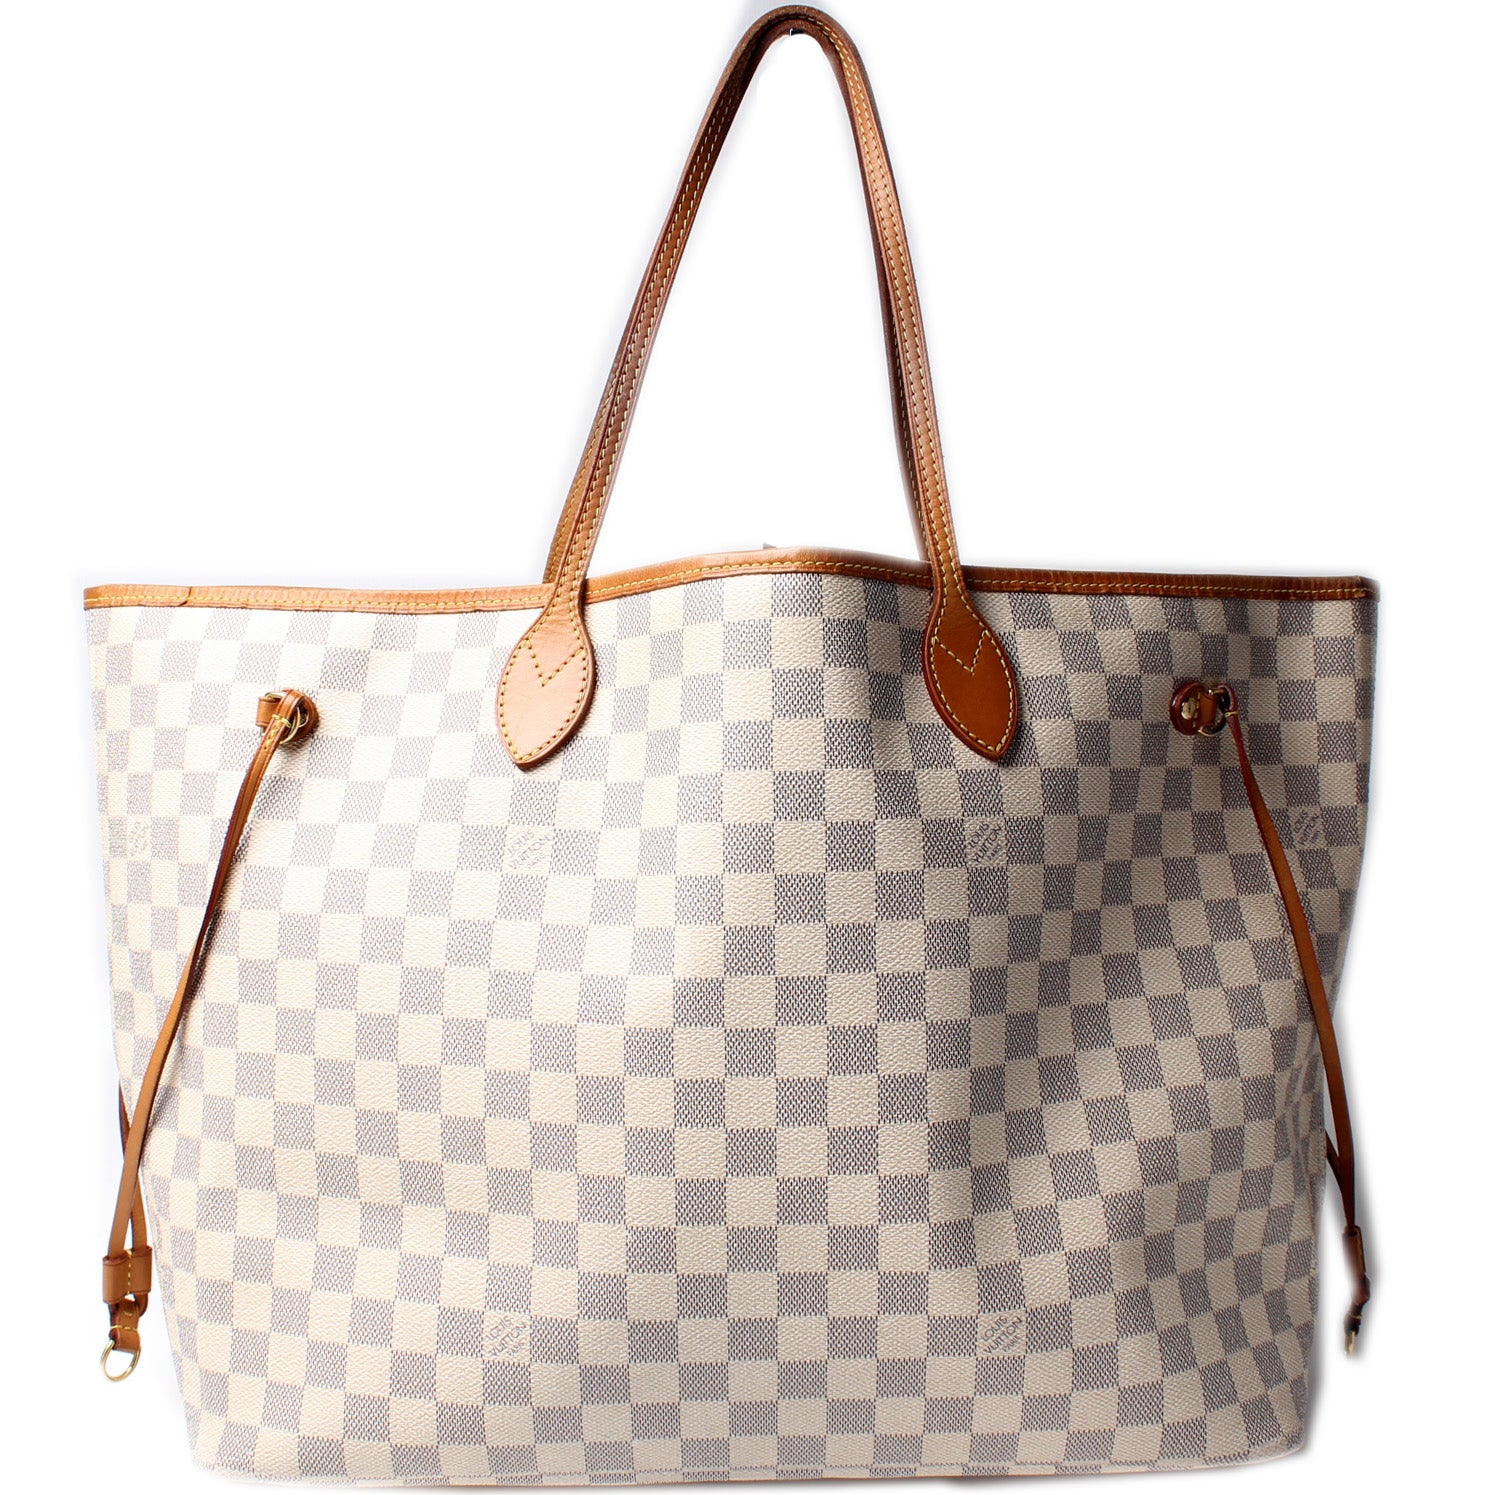 Louis Vuitton Neverfull GM in Damier Azure - SOLD